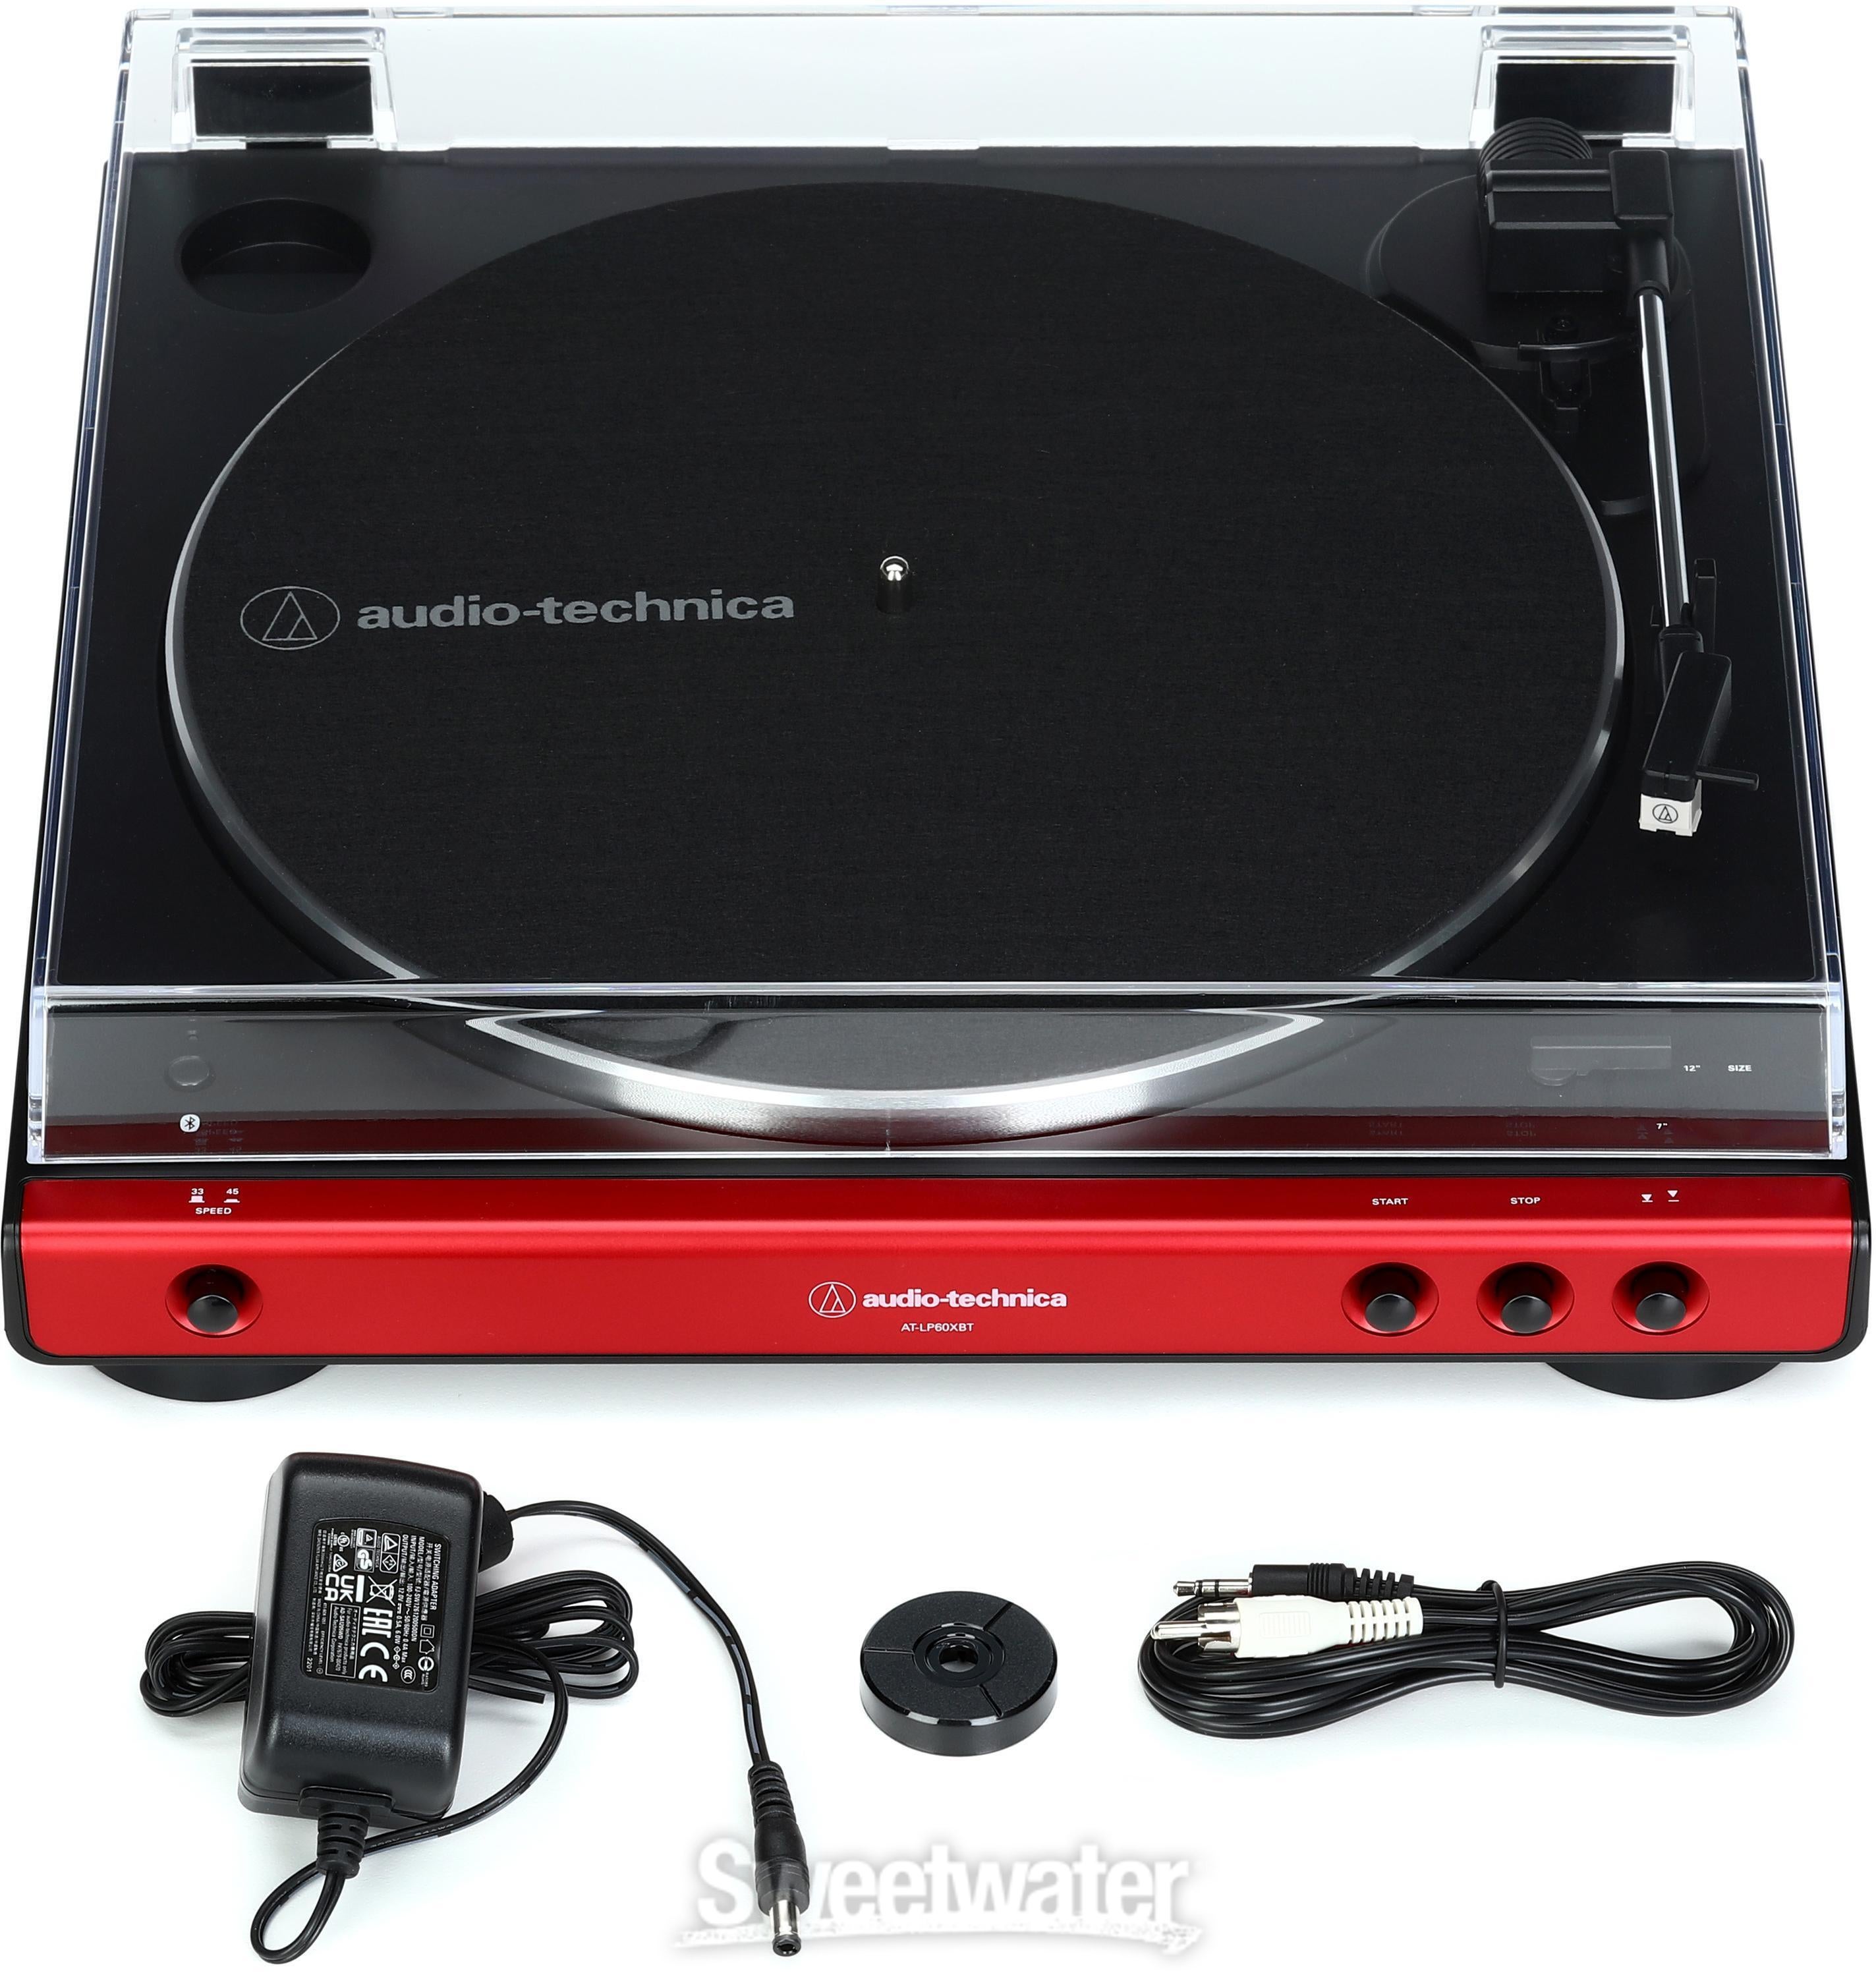 Audio-Technica AT-LP60XBT Wireless Belt-Drive Turntable with Bluetooth -  Red | Sweetwater